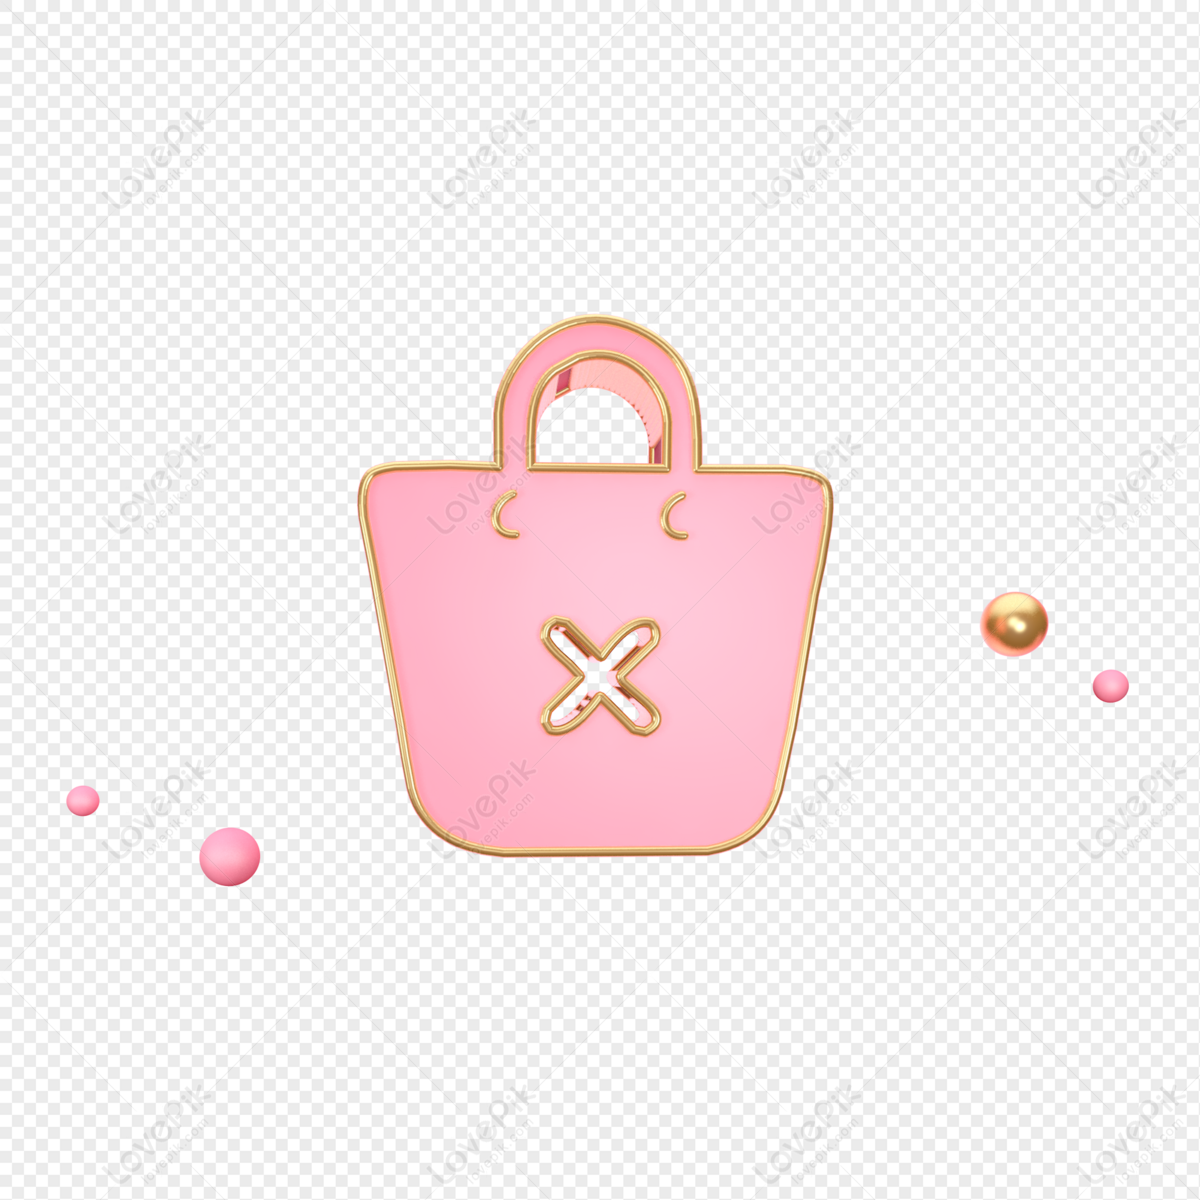 Severe Hd Transparent, Several Pink Shopping Bags, Shopping Bag Clipart, Shopping  Bags, Exquisite Shopping Bags PNG Image For Free Download